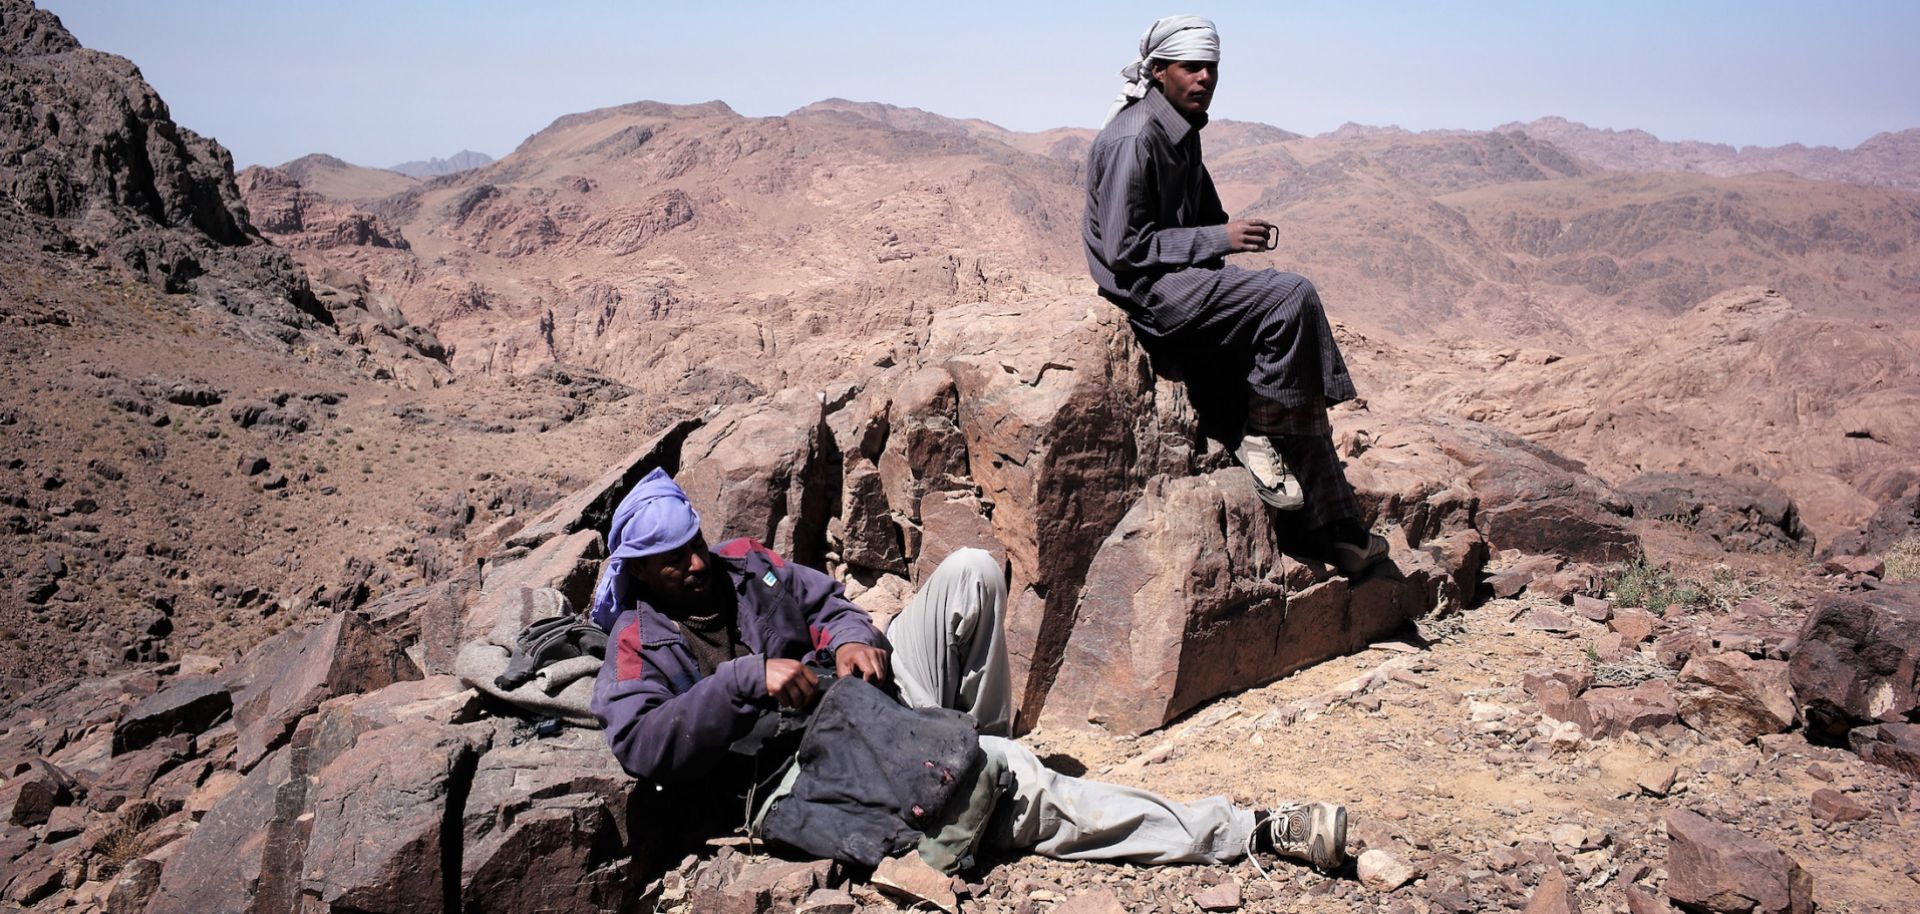 Egypt has long had an uneasy relationship with the nomadic Bedouins of the Sinai Peninsula.